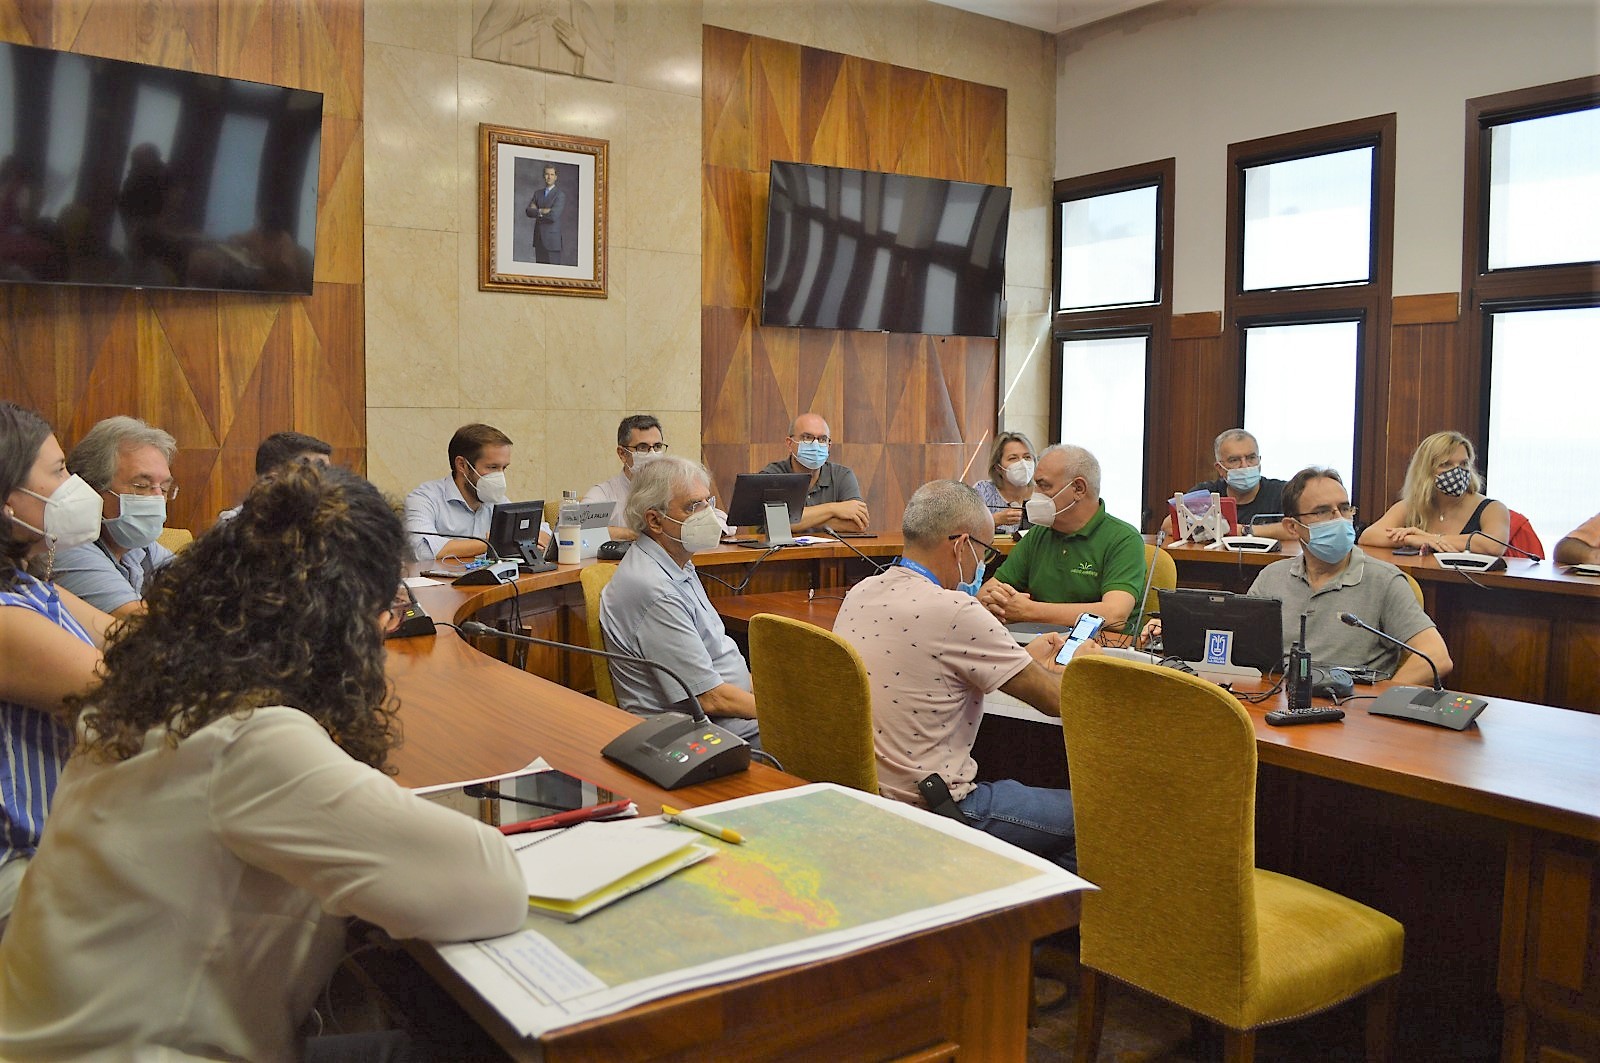 This photo shows the PEVOLCA committee on October 2nd. Sourced from Gobierno de Canarias (2021).